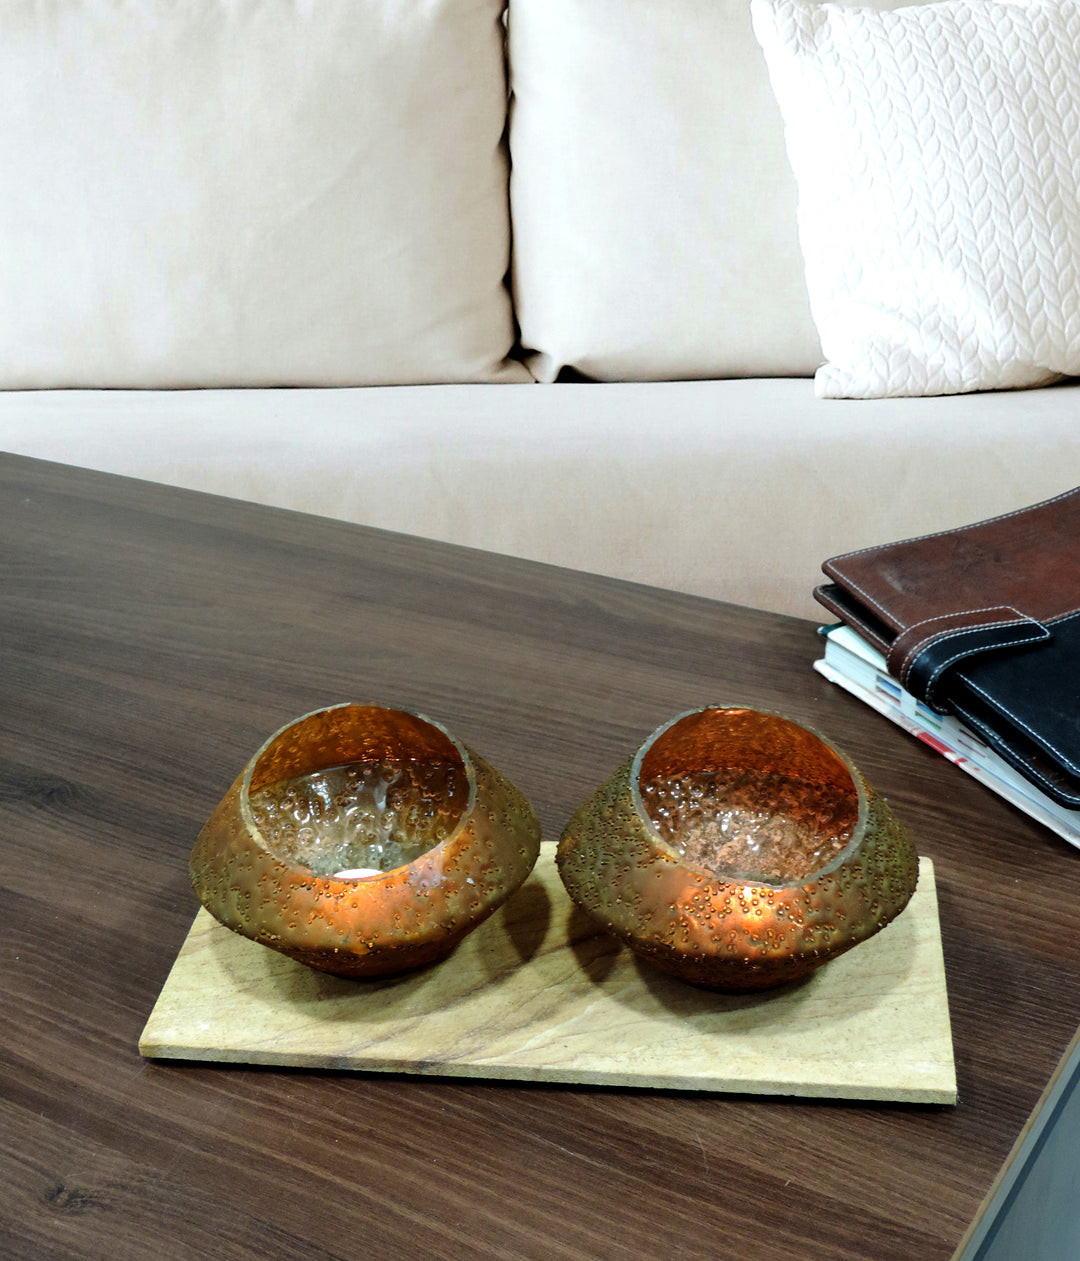 Ainaa Collection - Set of 2 Glass Votive with a Decorative tray - Gold